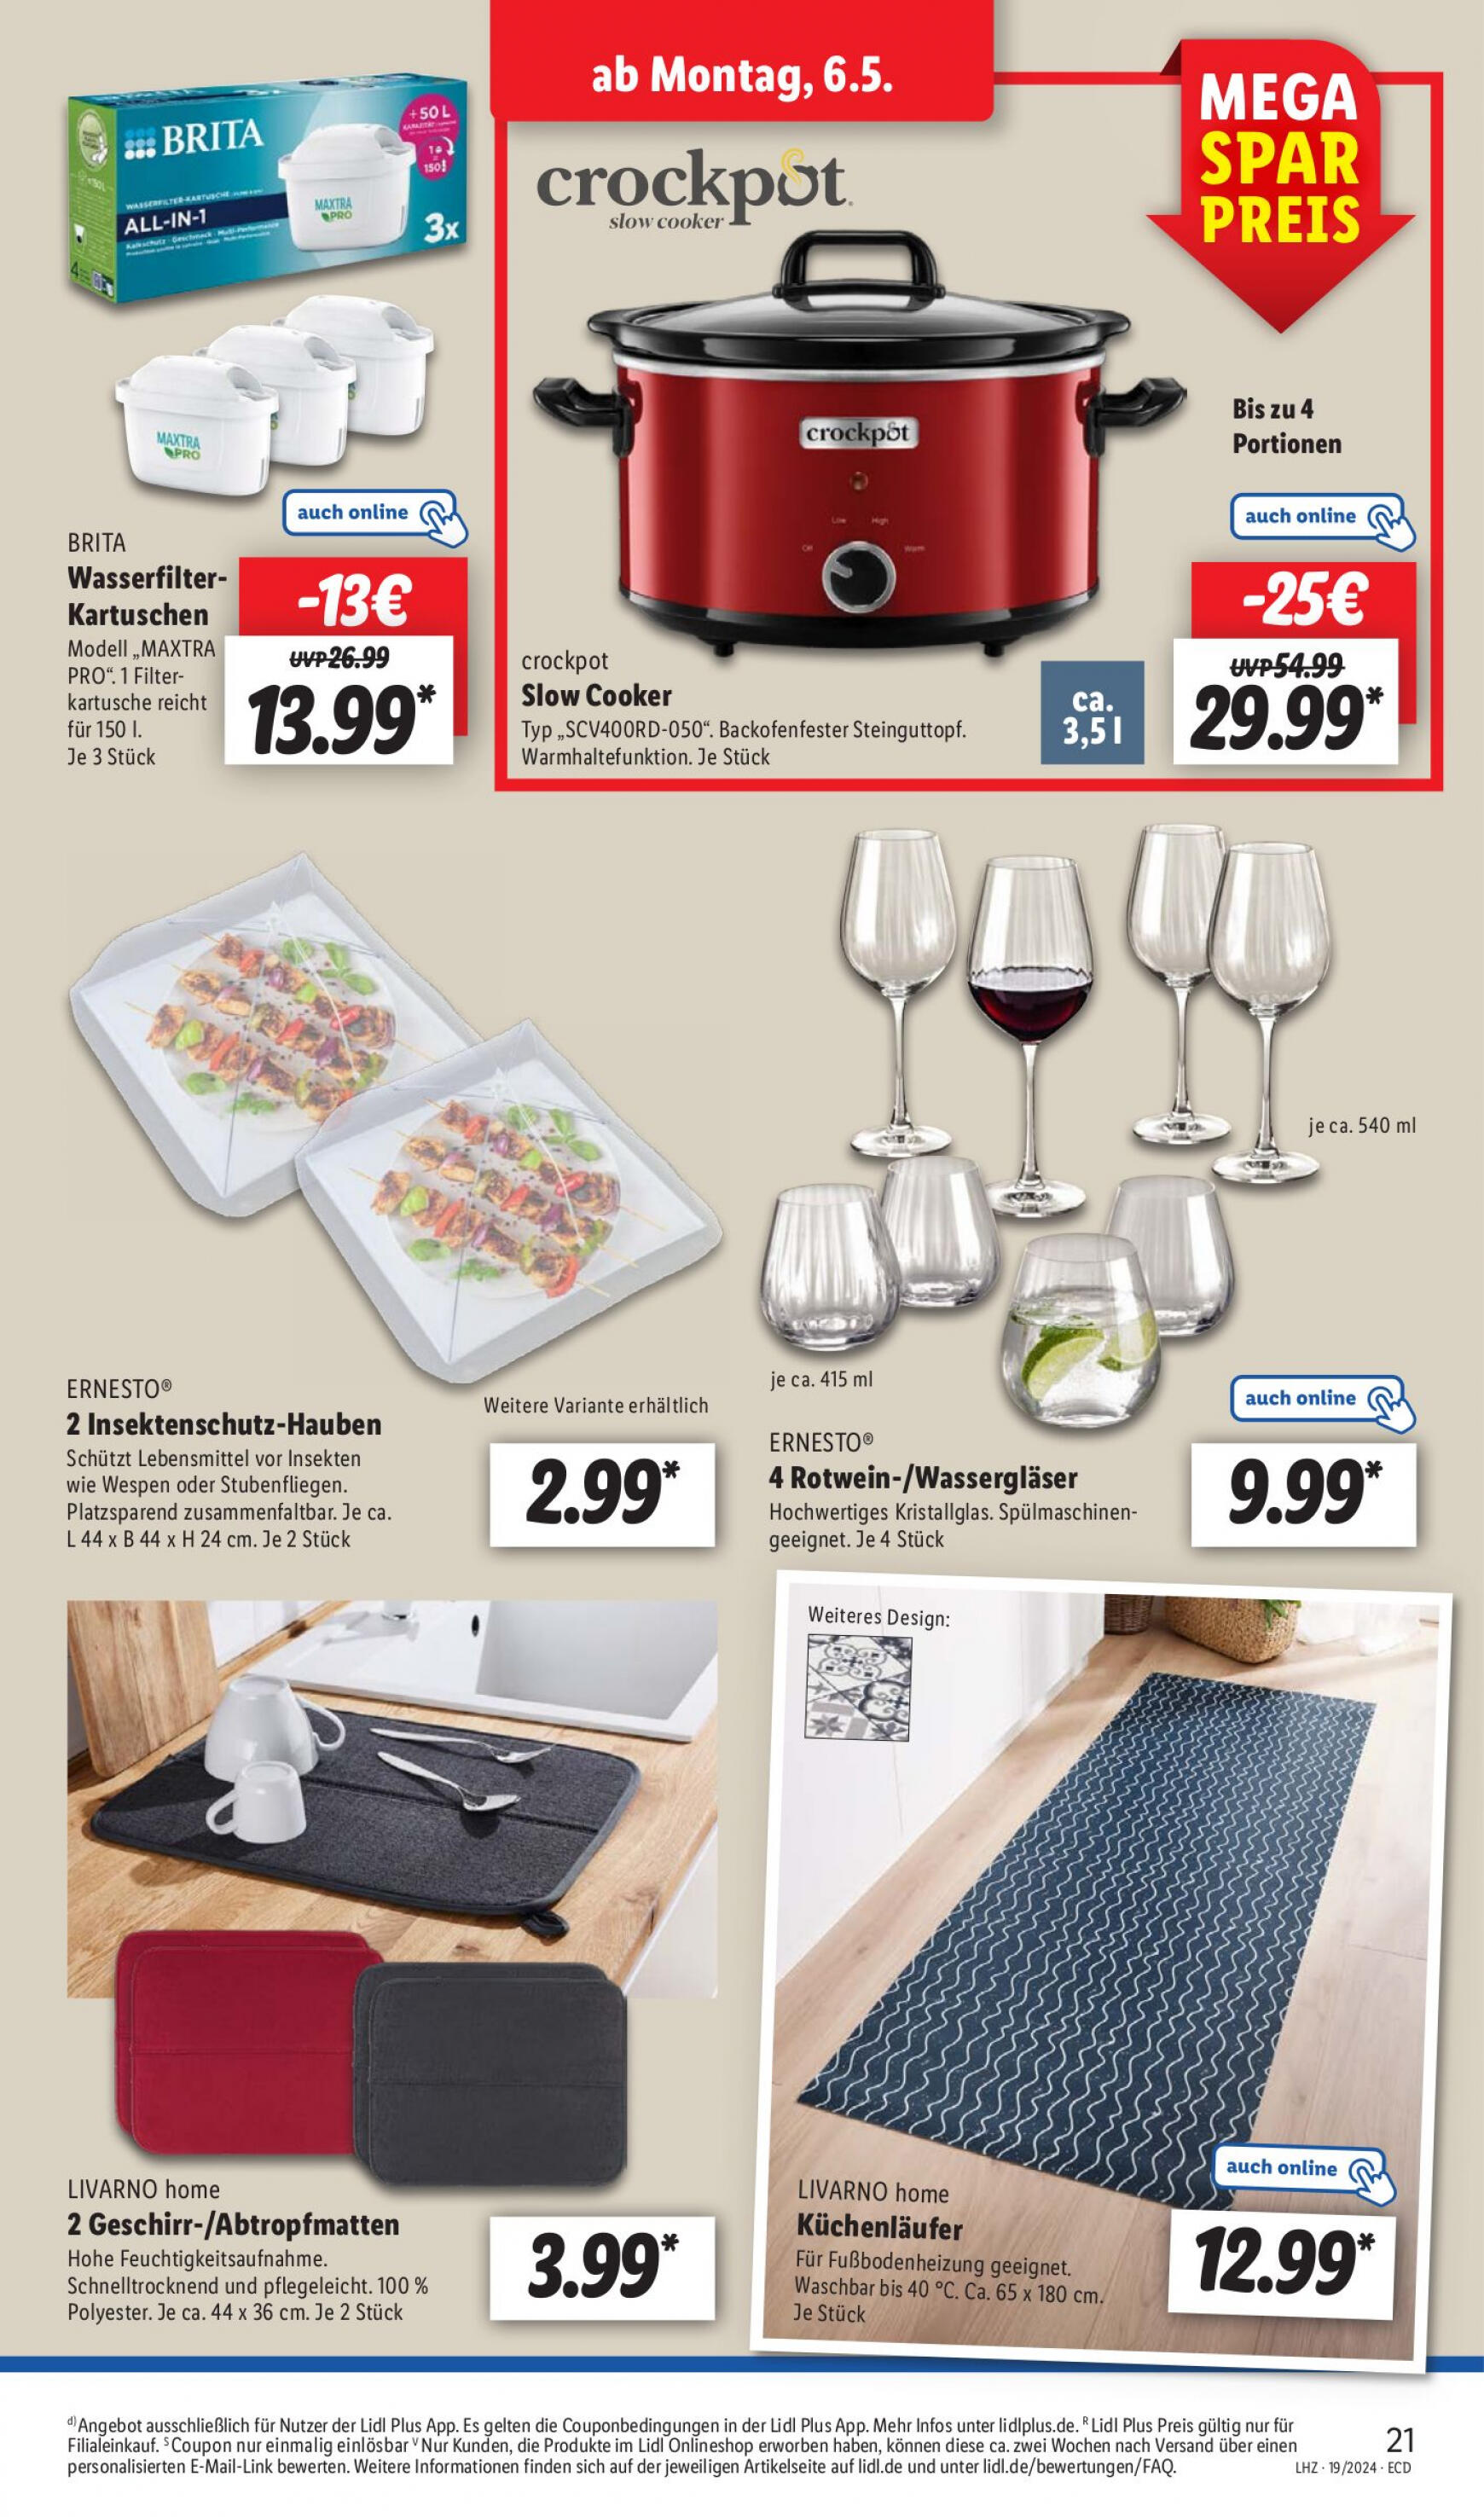 lidl - Flyer Lidl aktuell 06.05. - 11.05. - page: 23